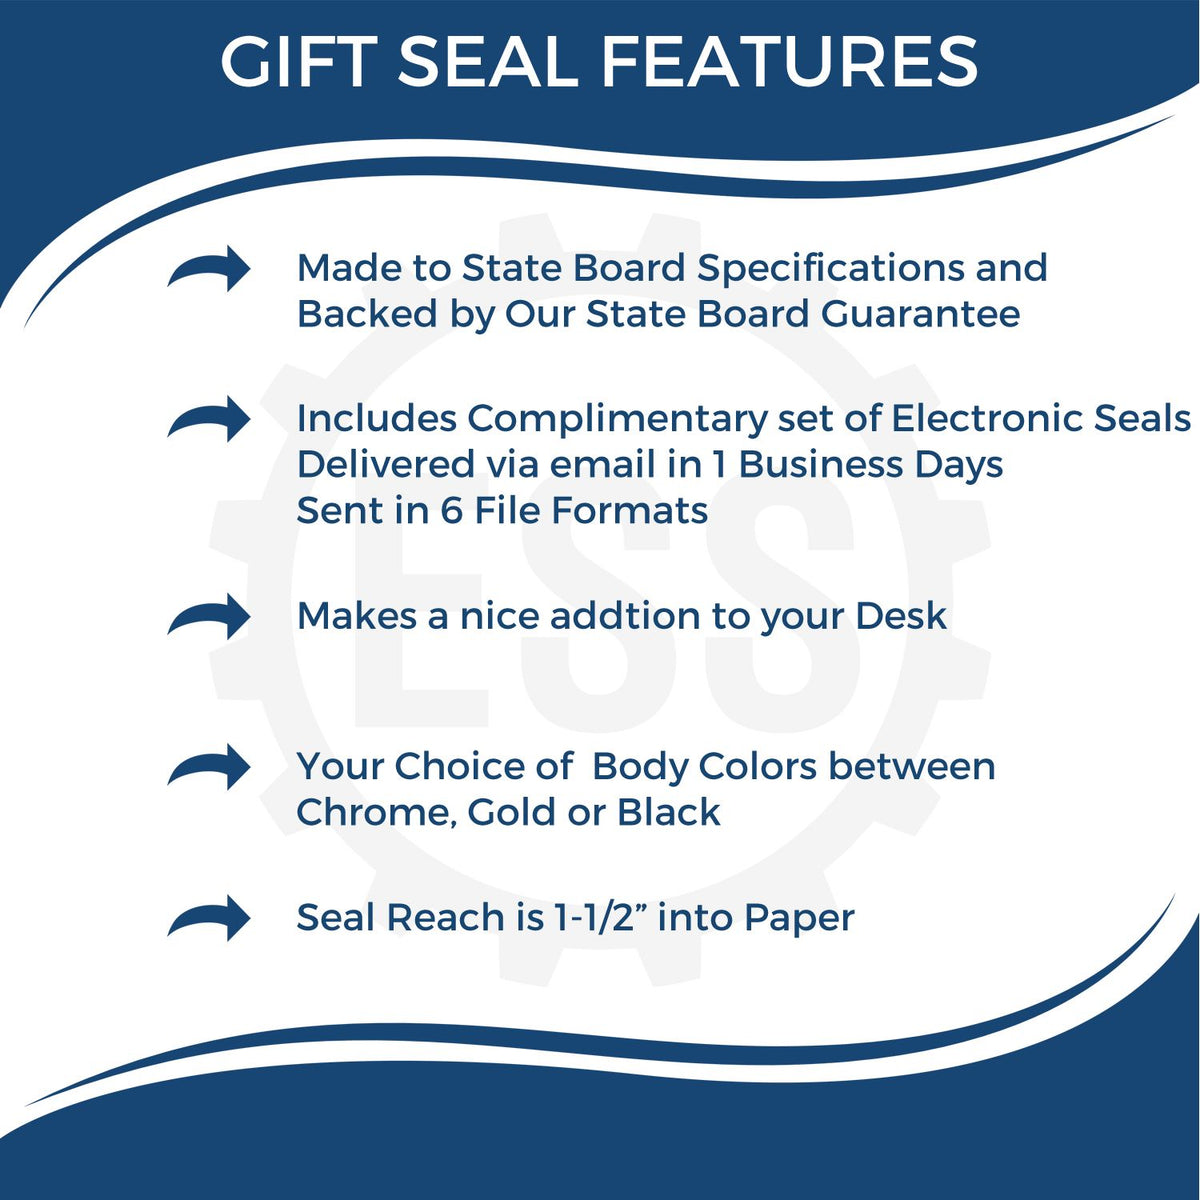 A picture of an infographic highlighting the selling points for the Gift Montana Engineer Seal